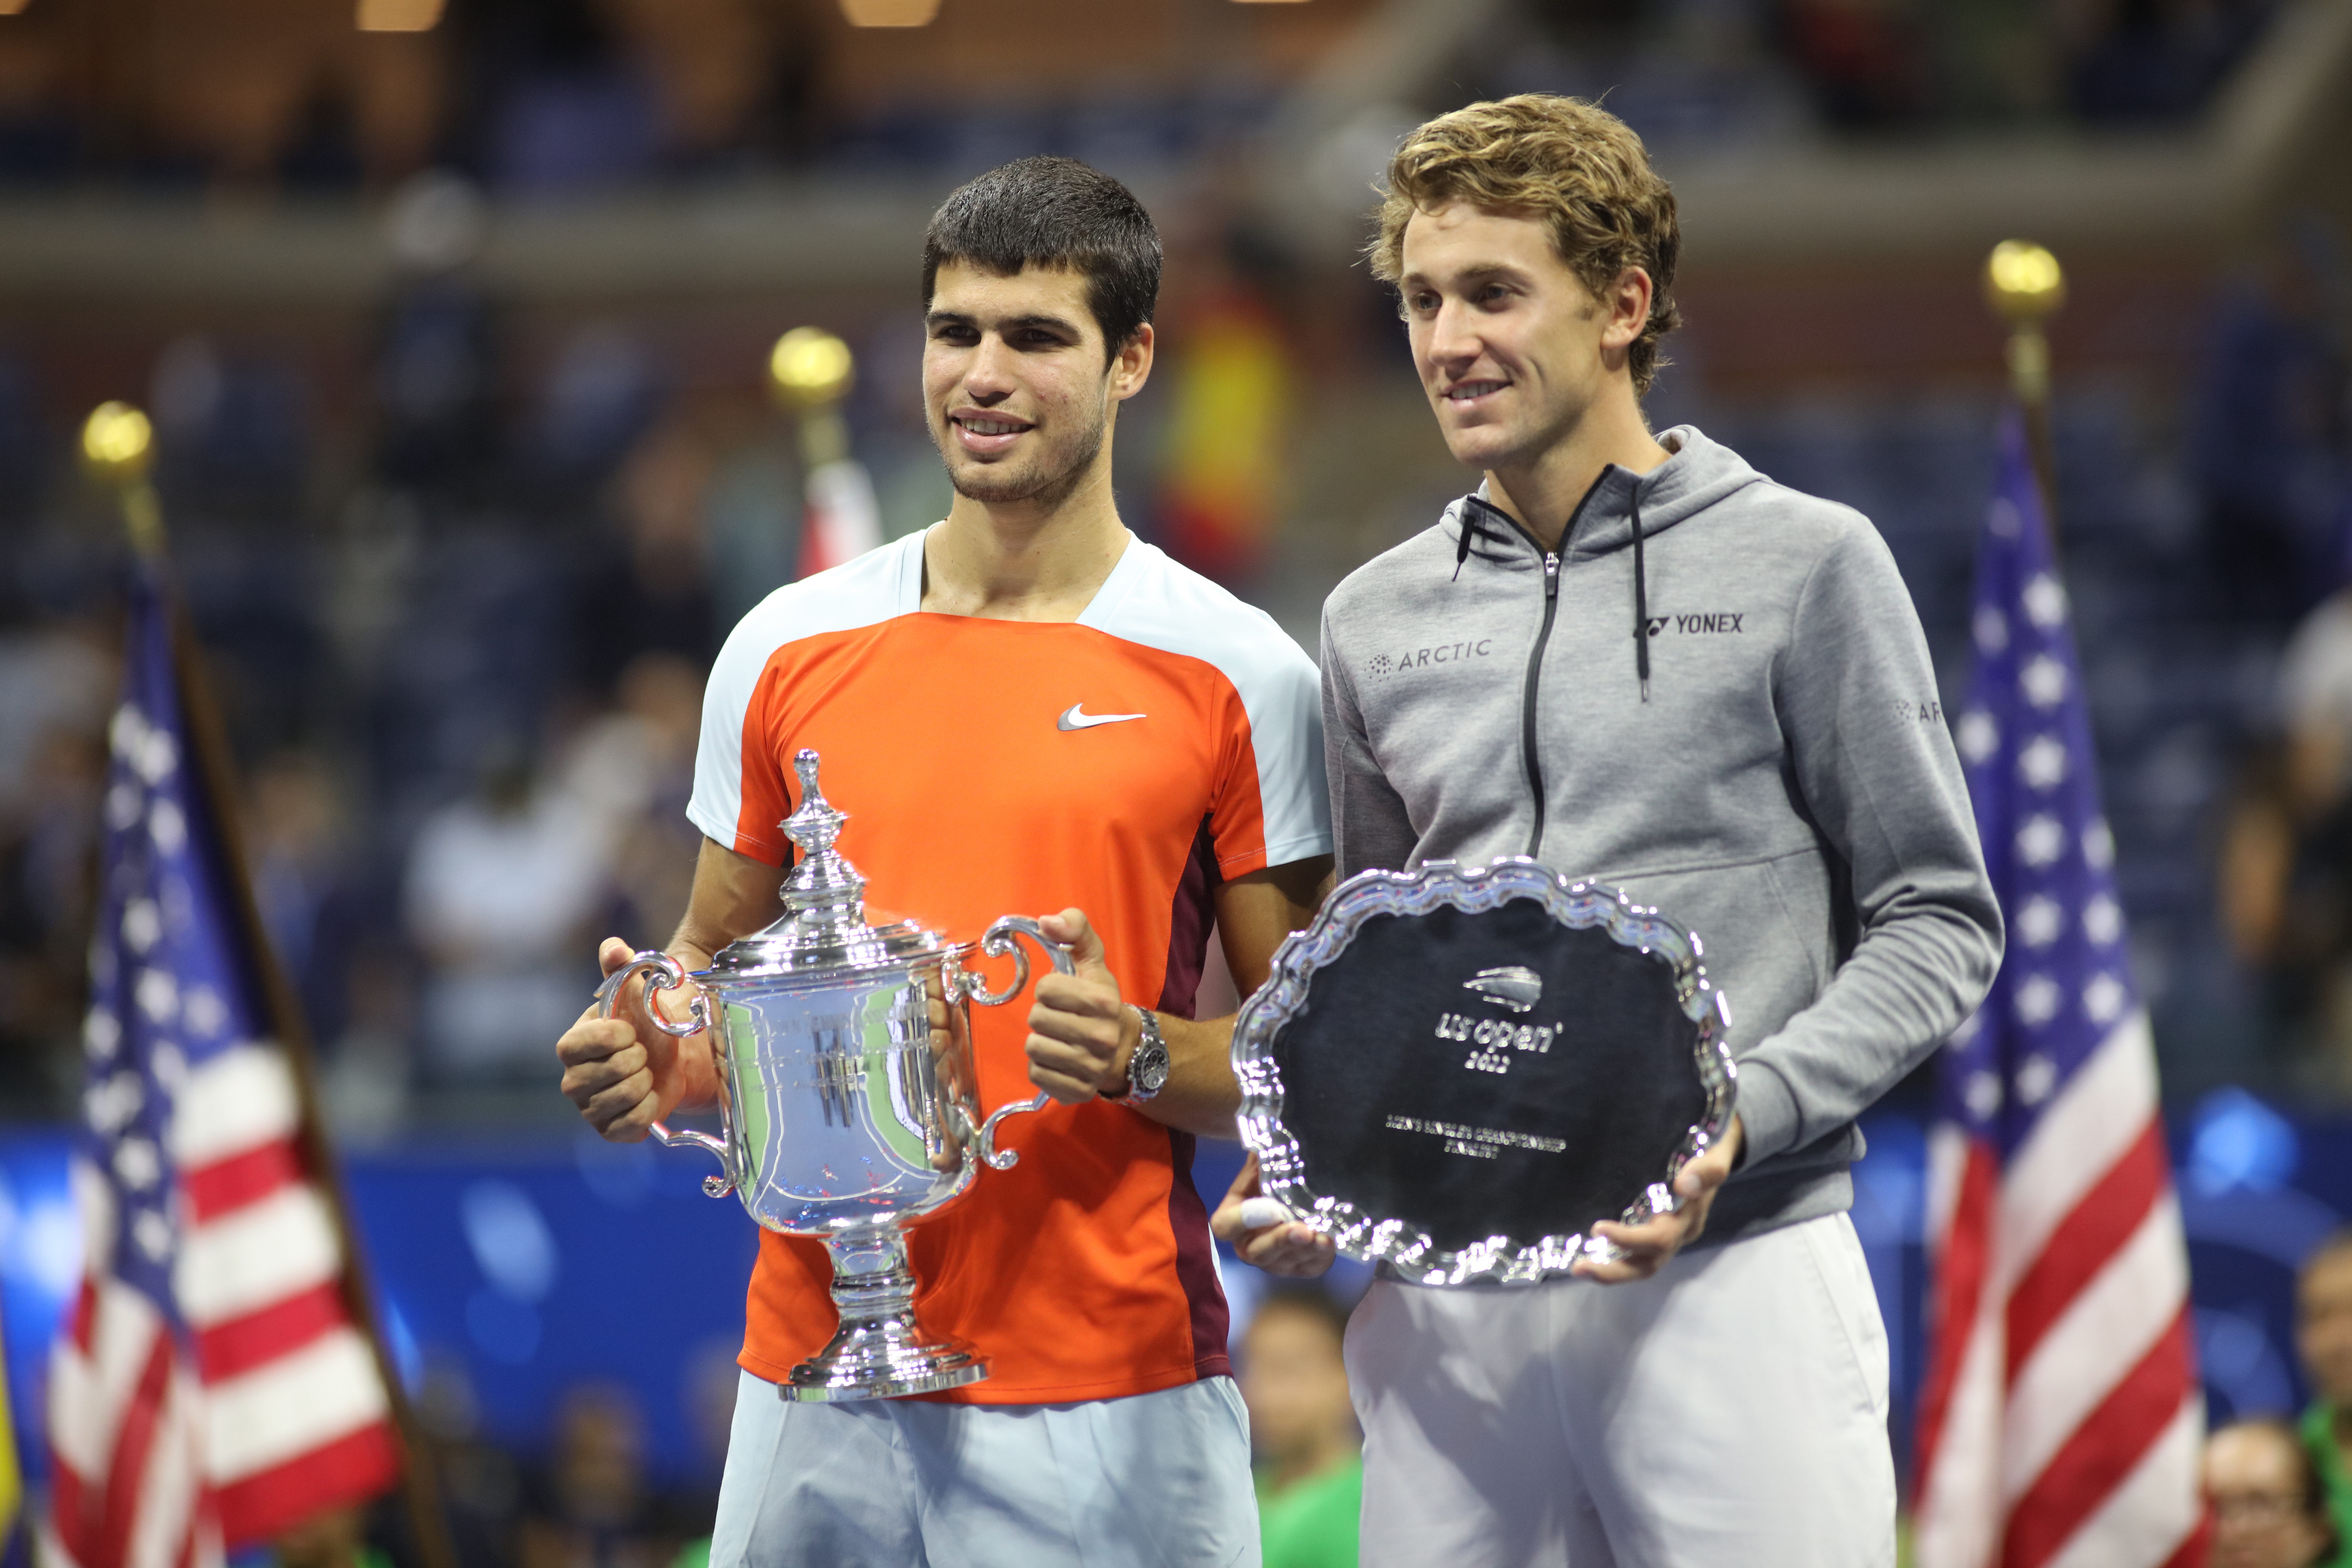 Winner Carlos Alcaraz of Spain and runner-up Casper Ruud of Norway with their trophies after the Men’s Singles Final match on Arthur Ashe Stadium during the US Open Tennis Championship 2022 at the USTA National Tennis Centre on September 11th 2022 in Flushing, Queens, New York City.